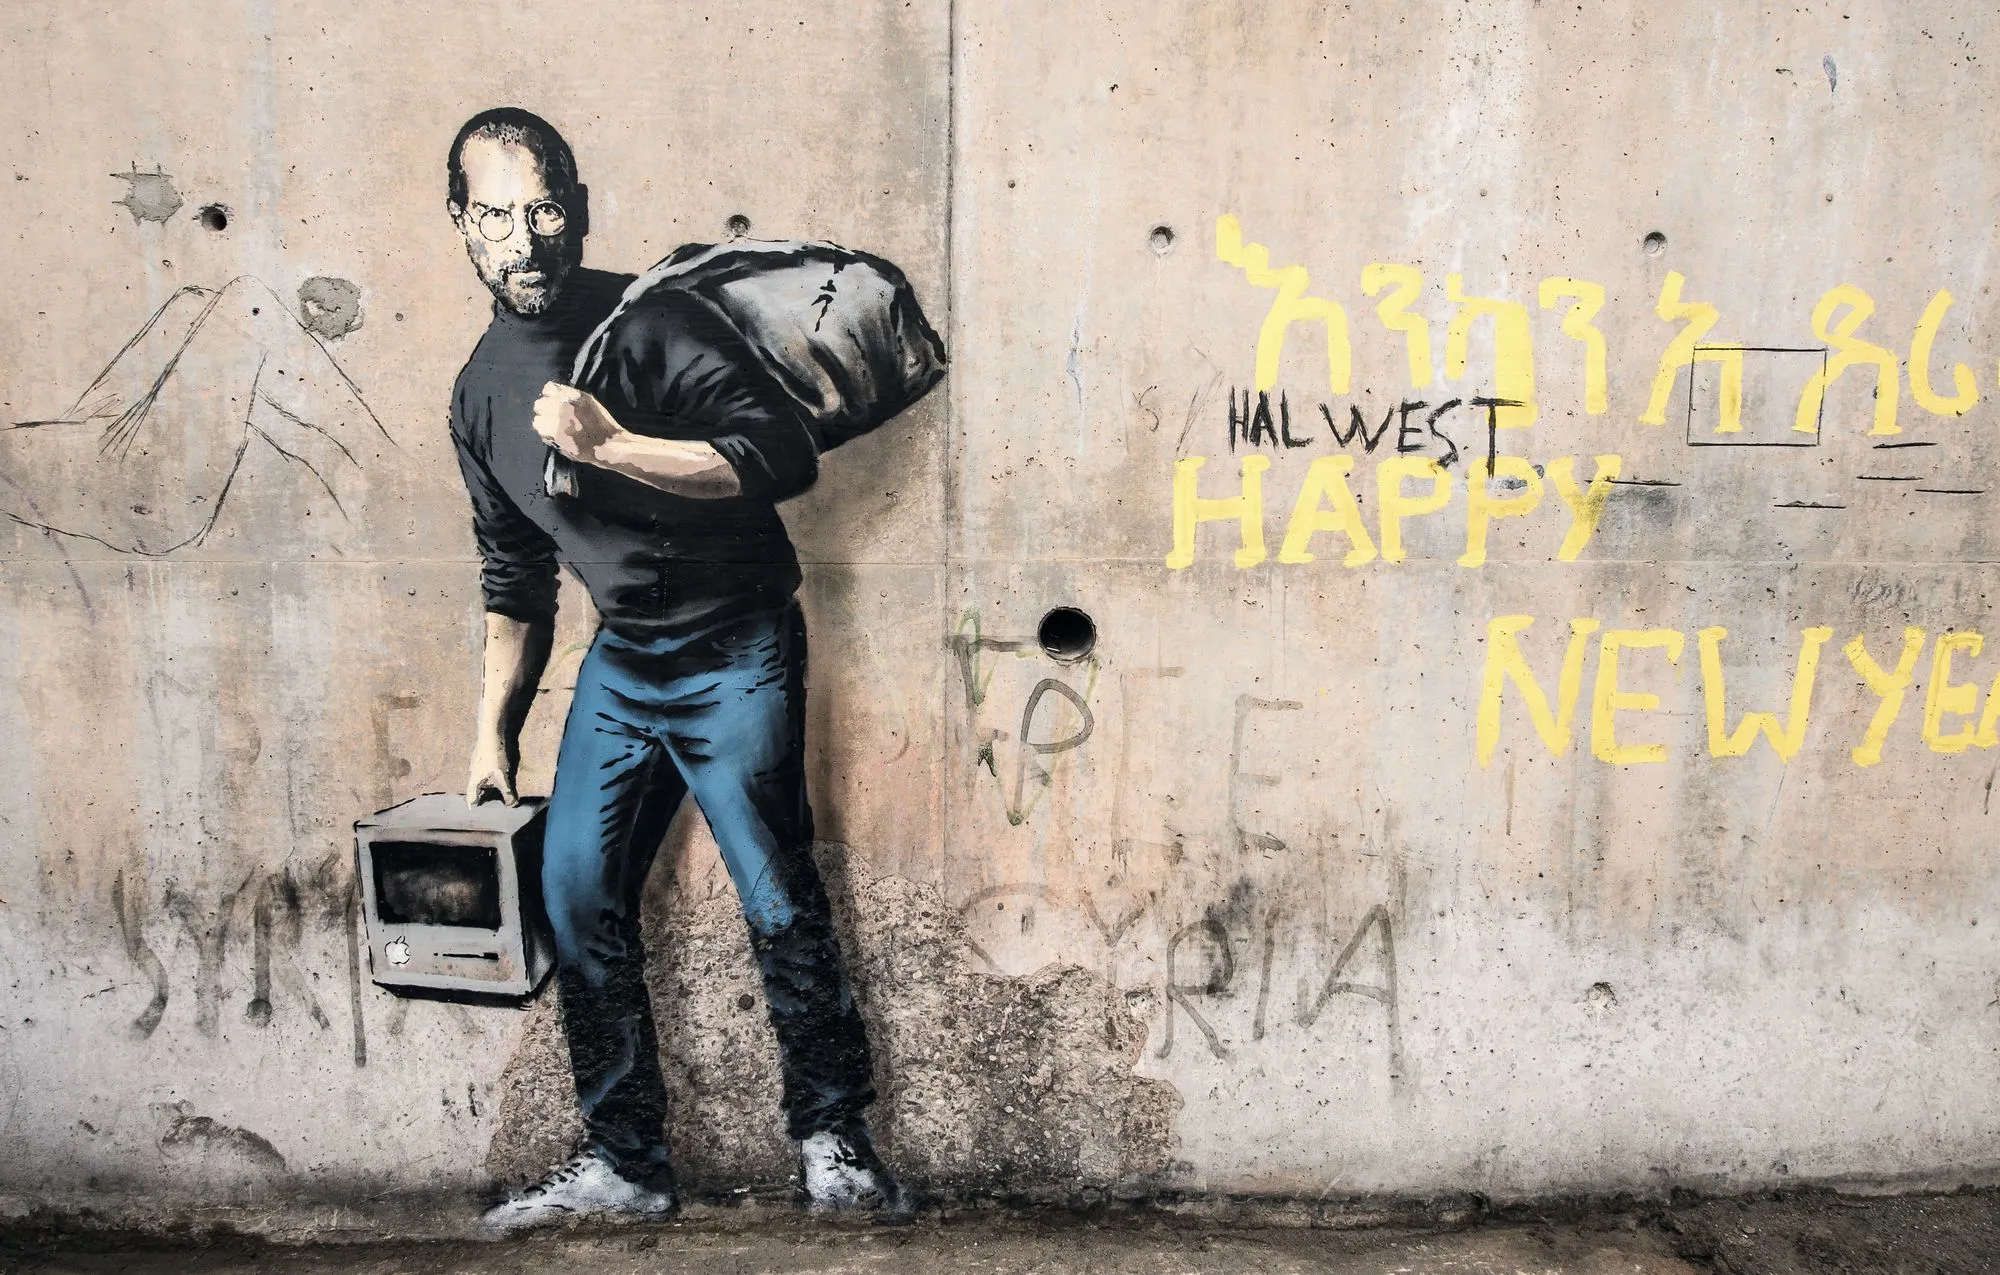 A mural by Banksy in Calais.